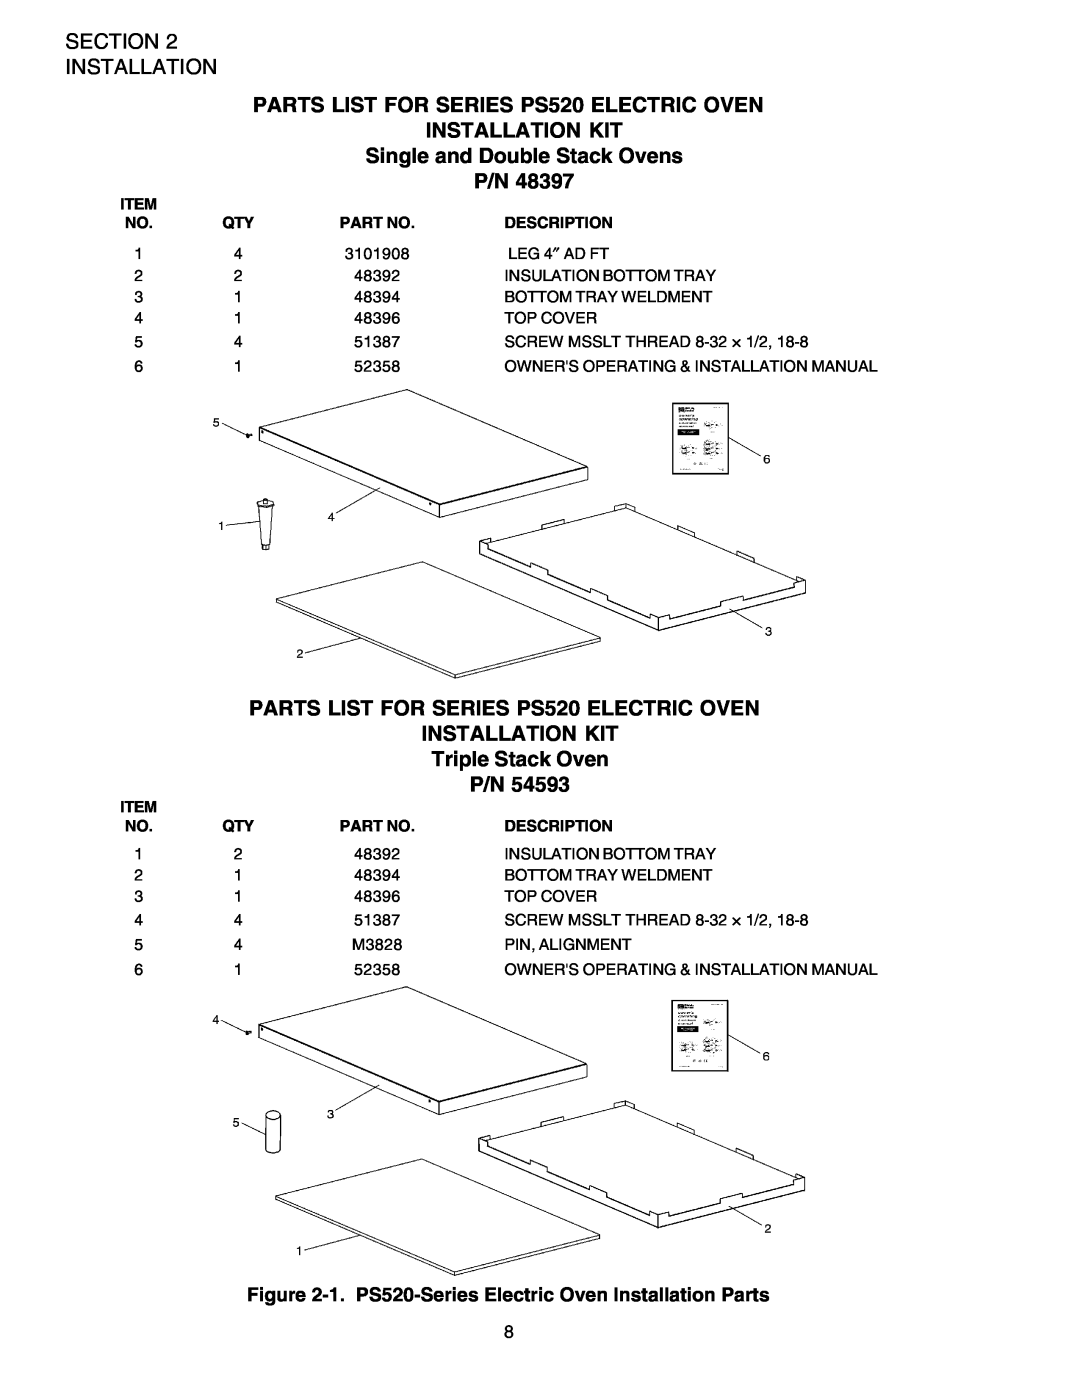 Middleby Marshall Section Installation, PARTS LIST FOR SERIES PS520 ELECTRIC OVEN, Installation Kit, Triple Stack Oven 